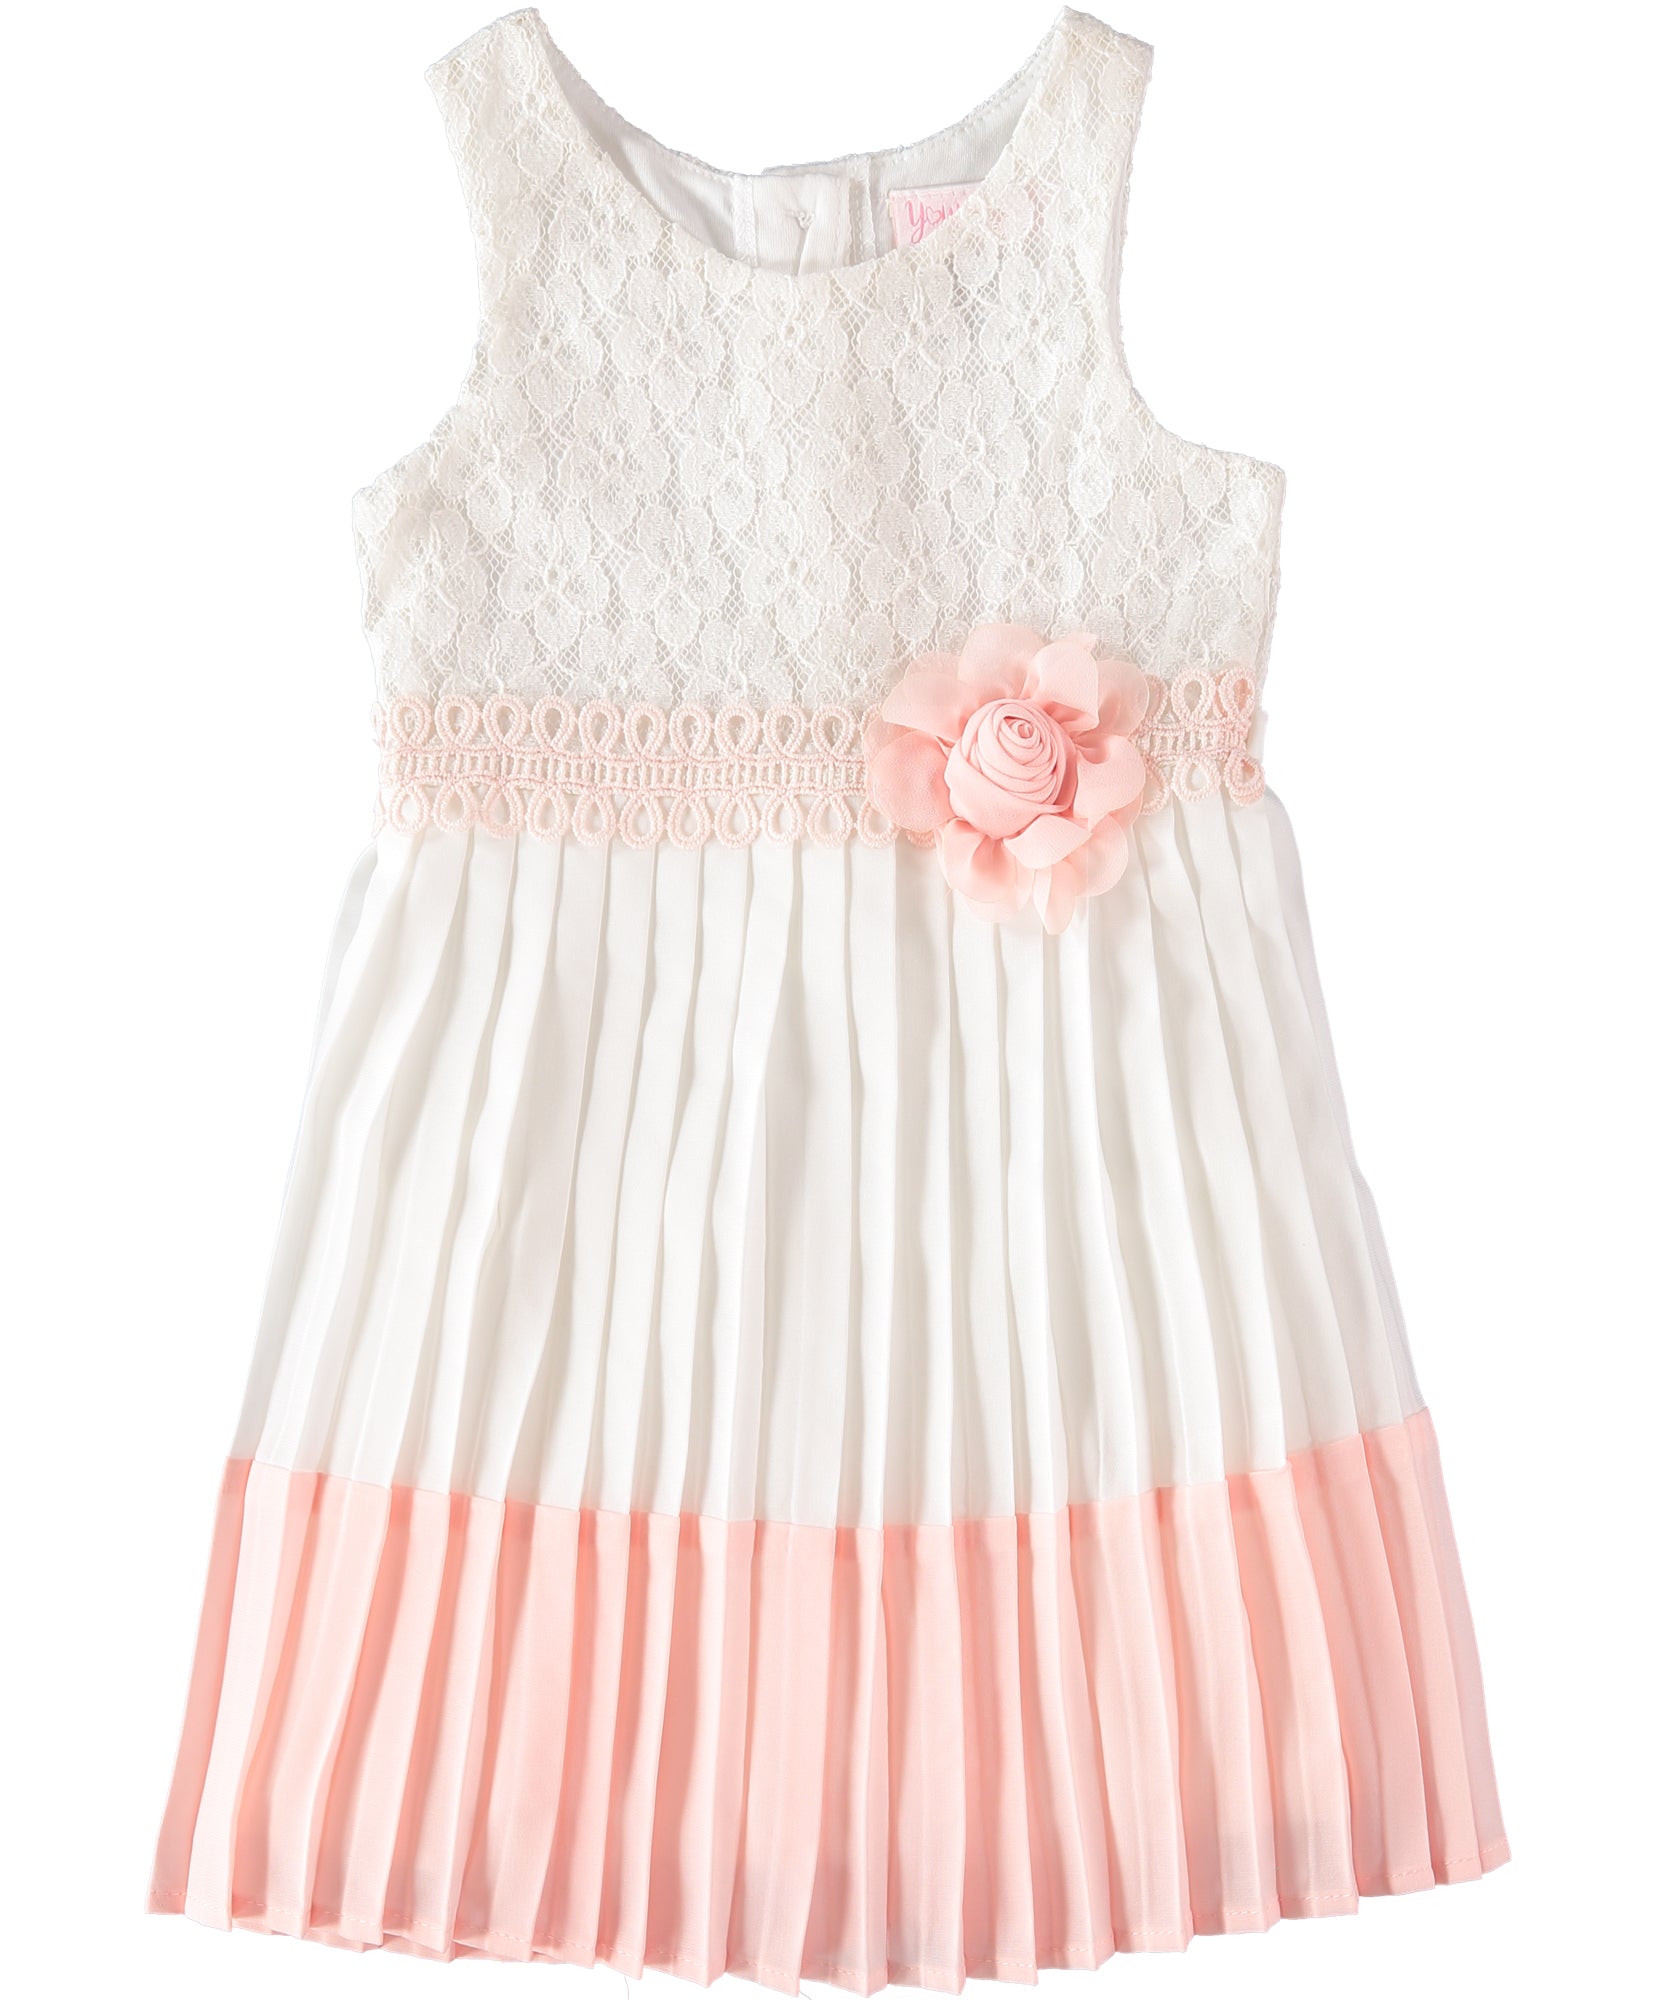 Youngland Girls Pleated Lace Dress with Shrug